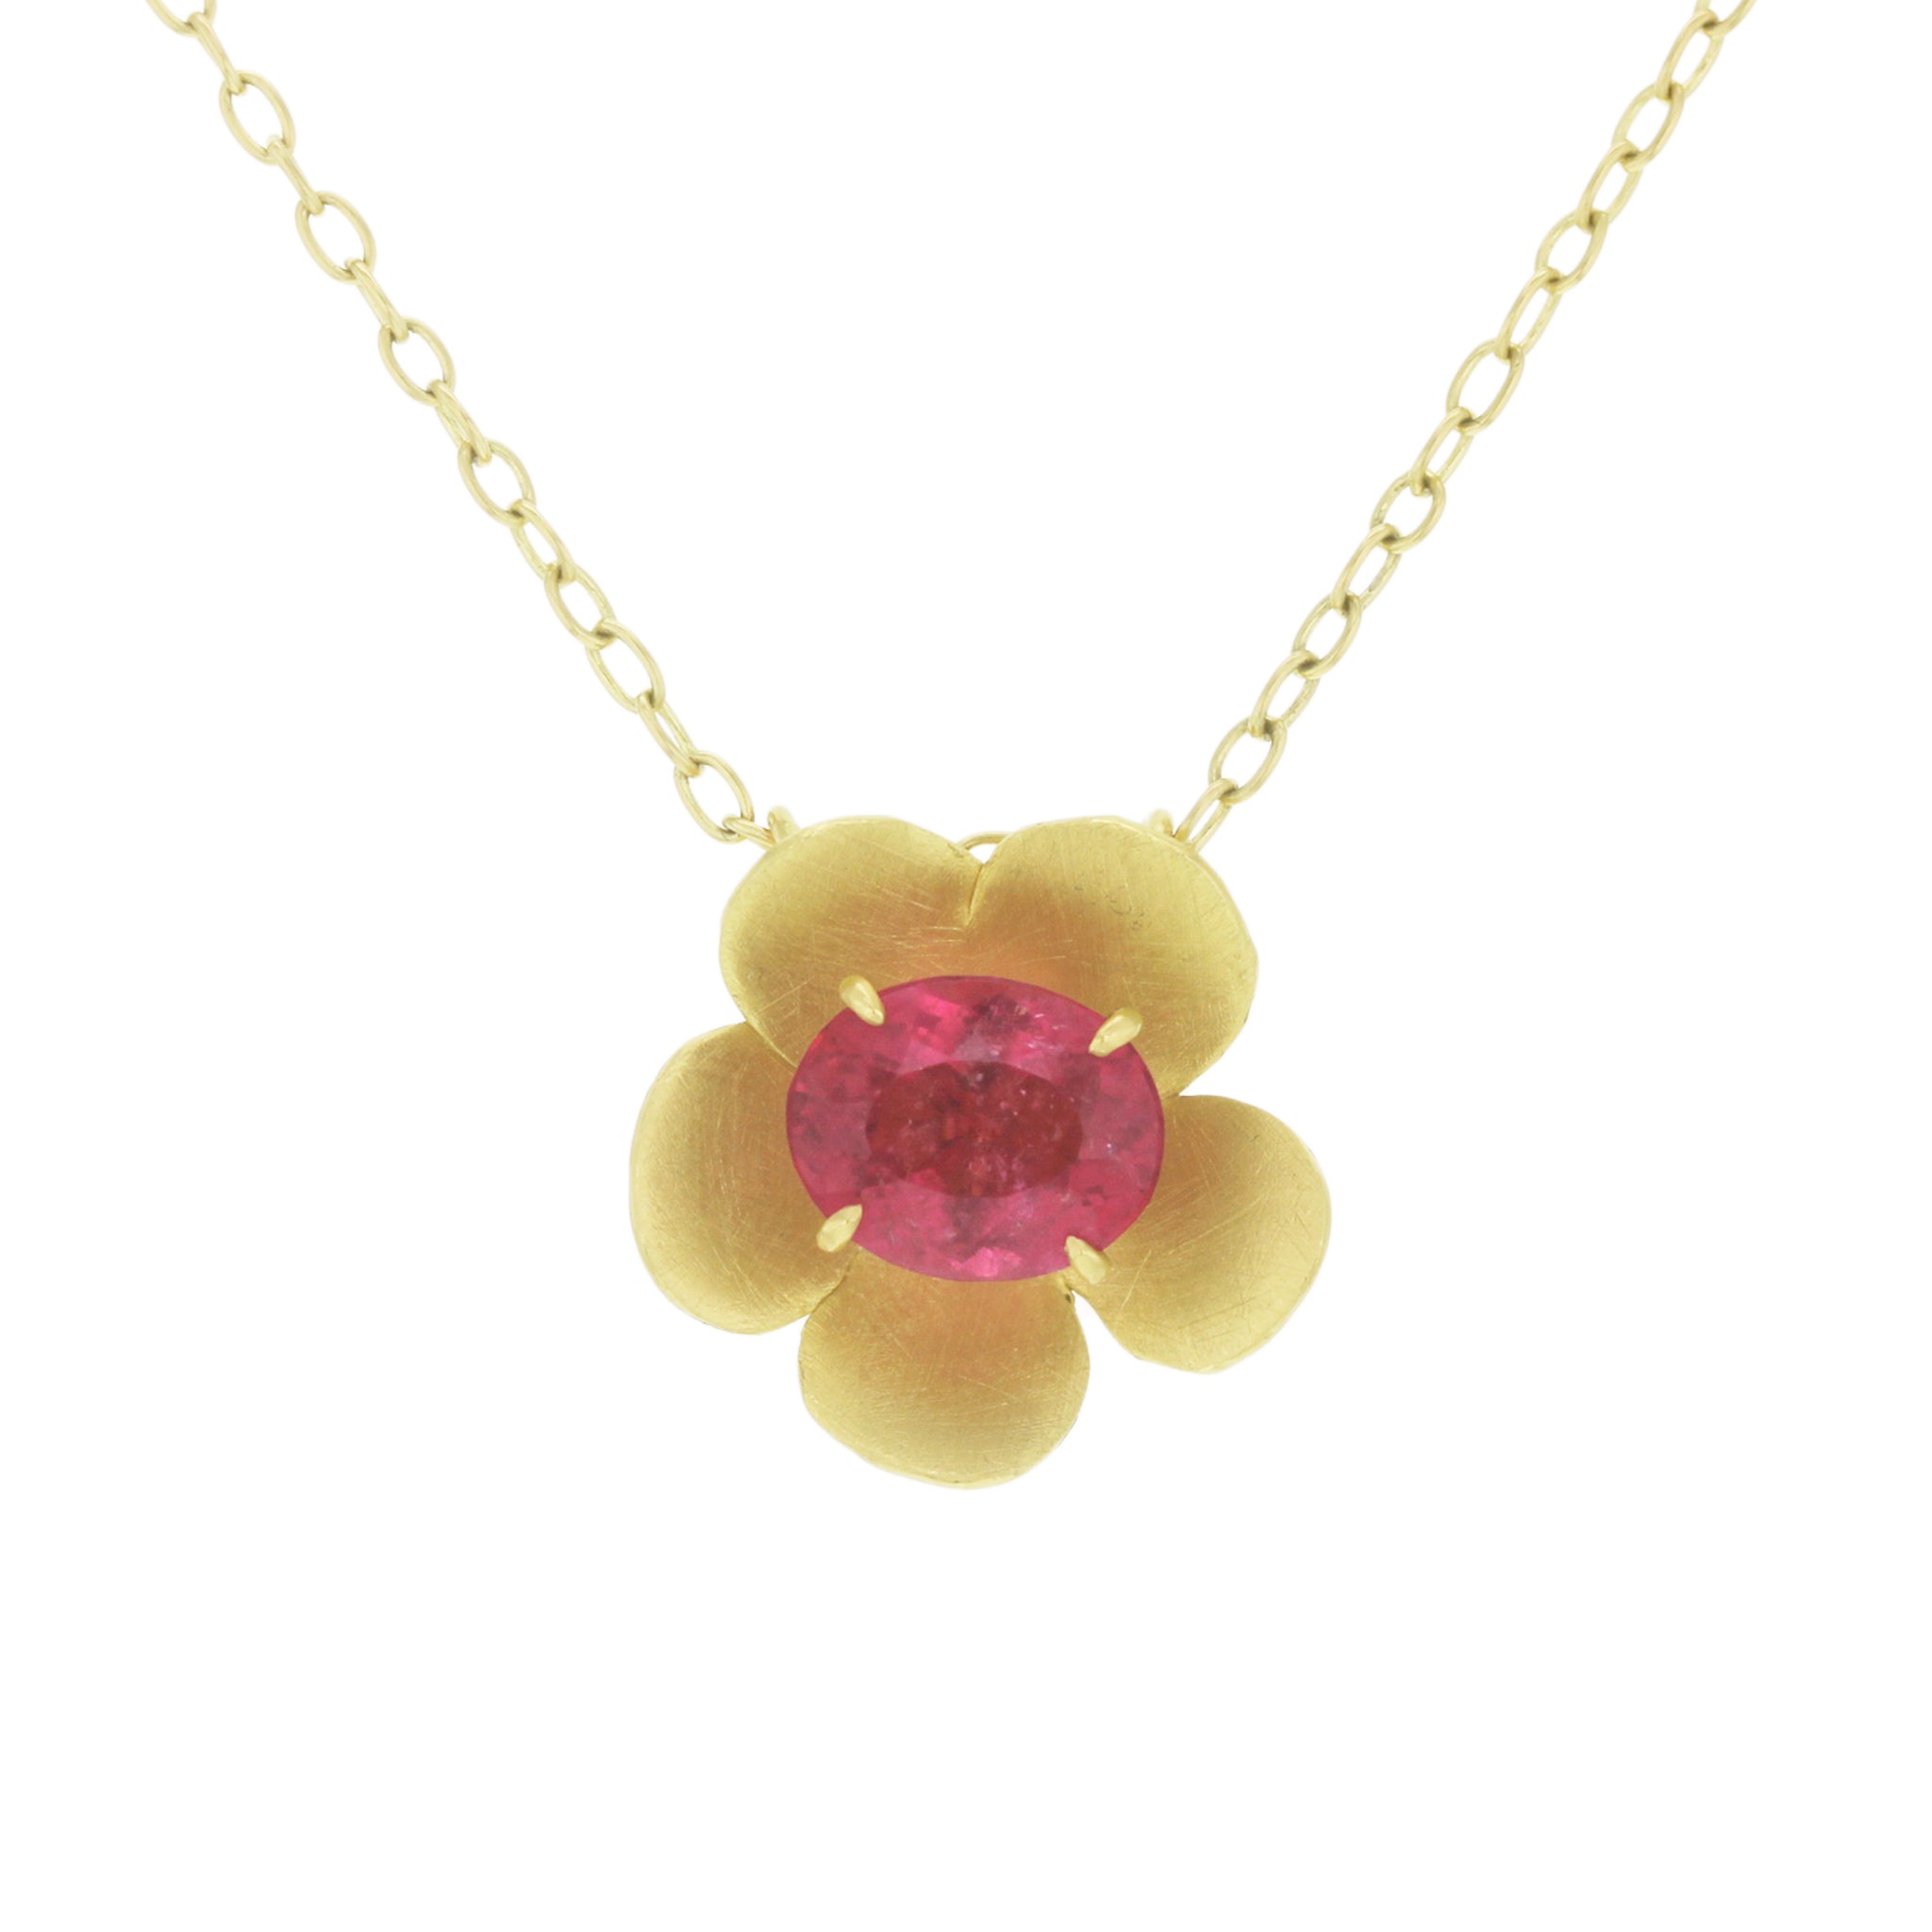 Stephanie Albertson Forget Me Not Flower Necklace with Rubellite Oval Gemstone on Chain - Be On Park